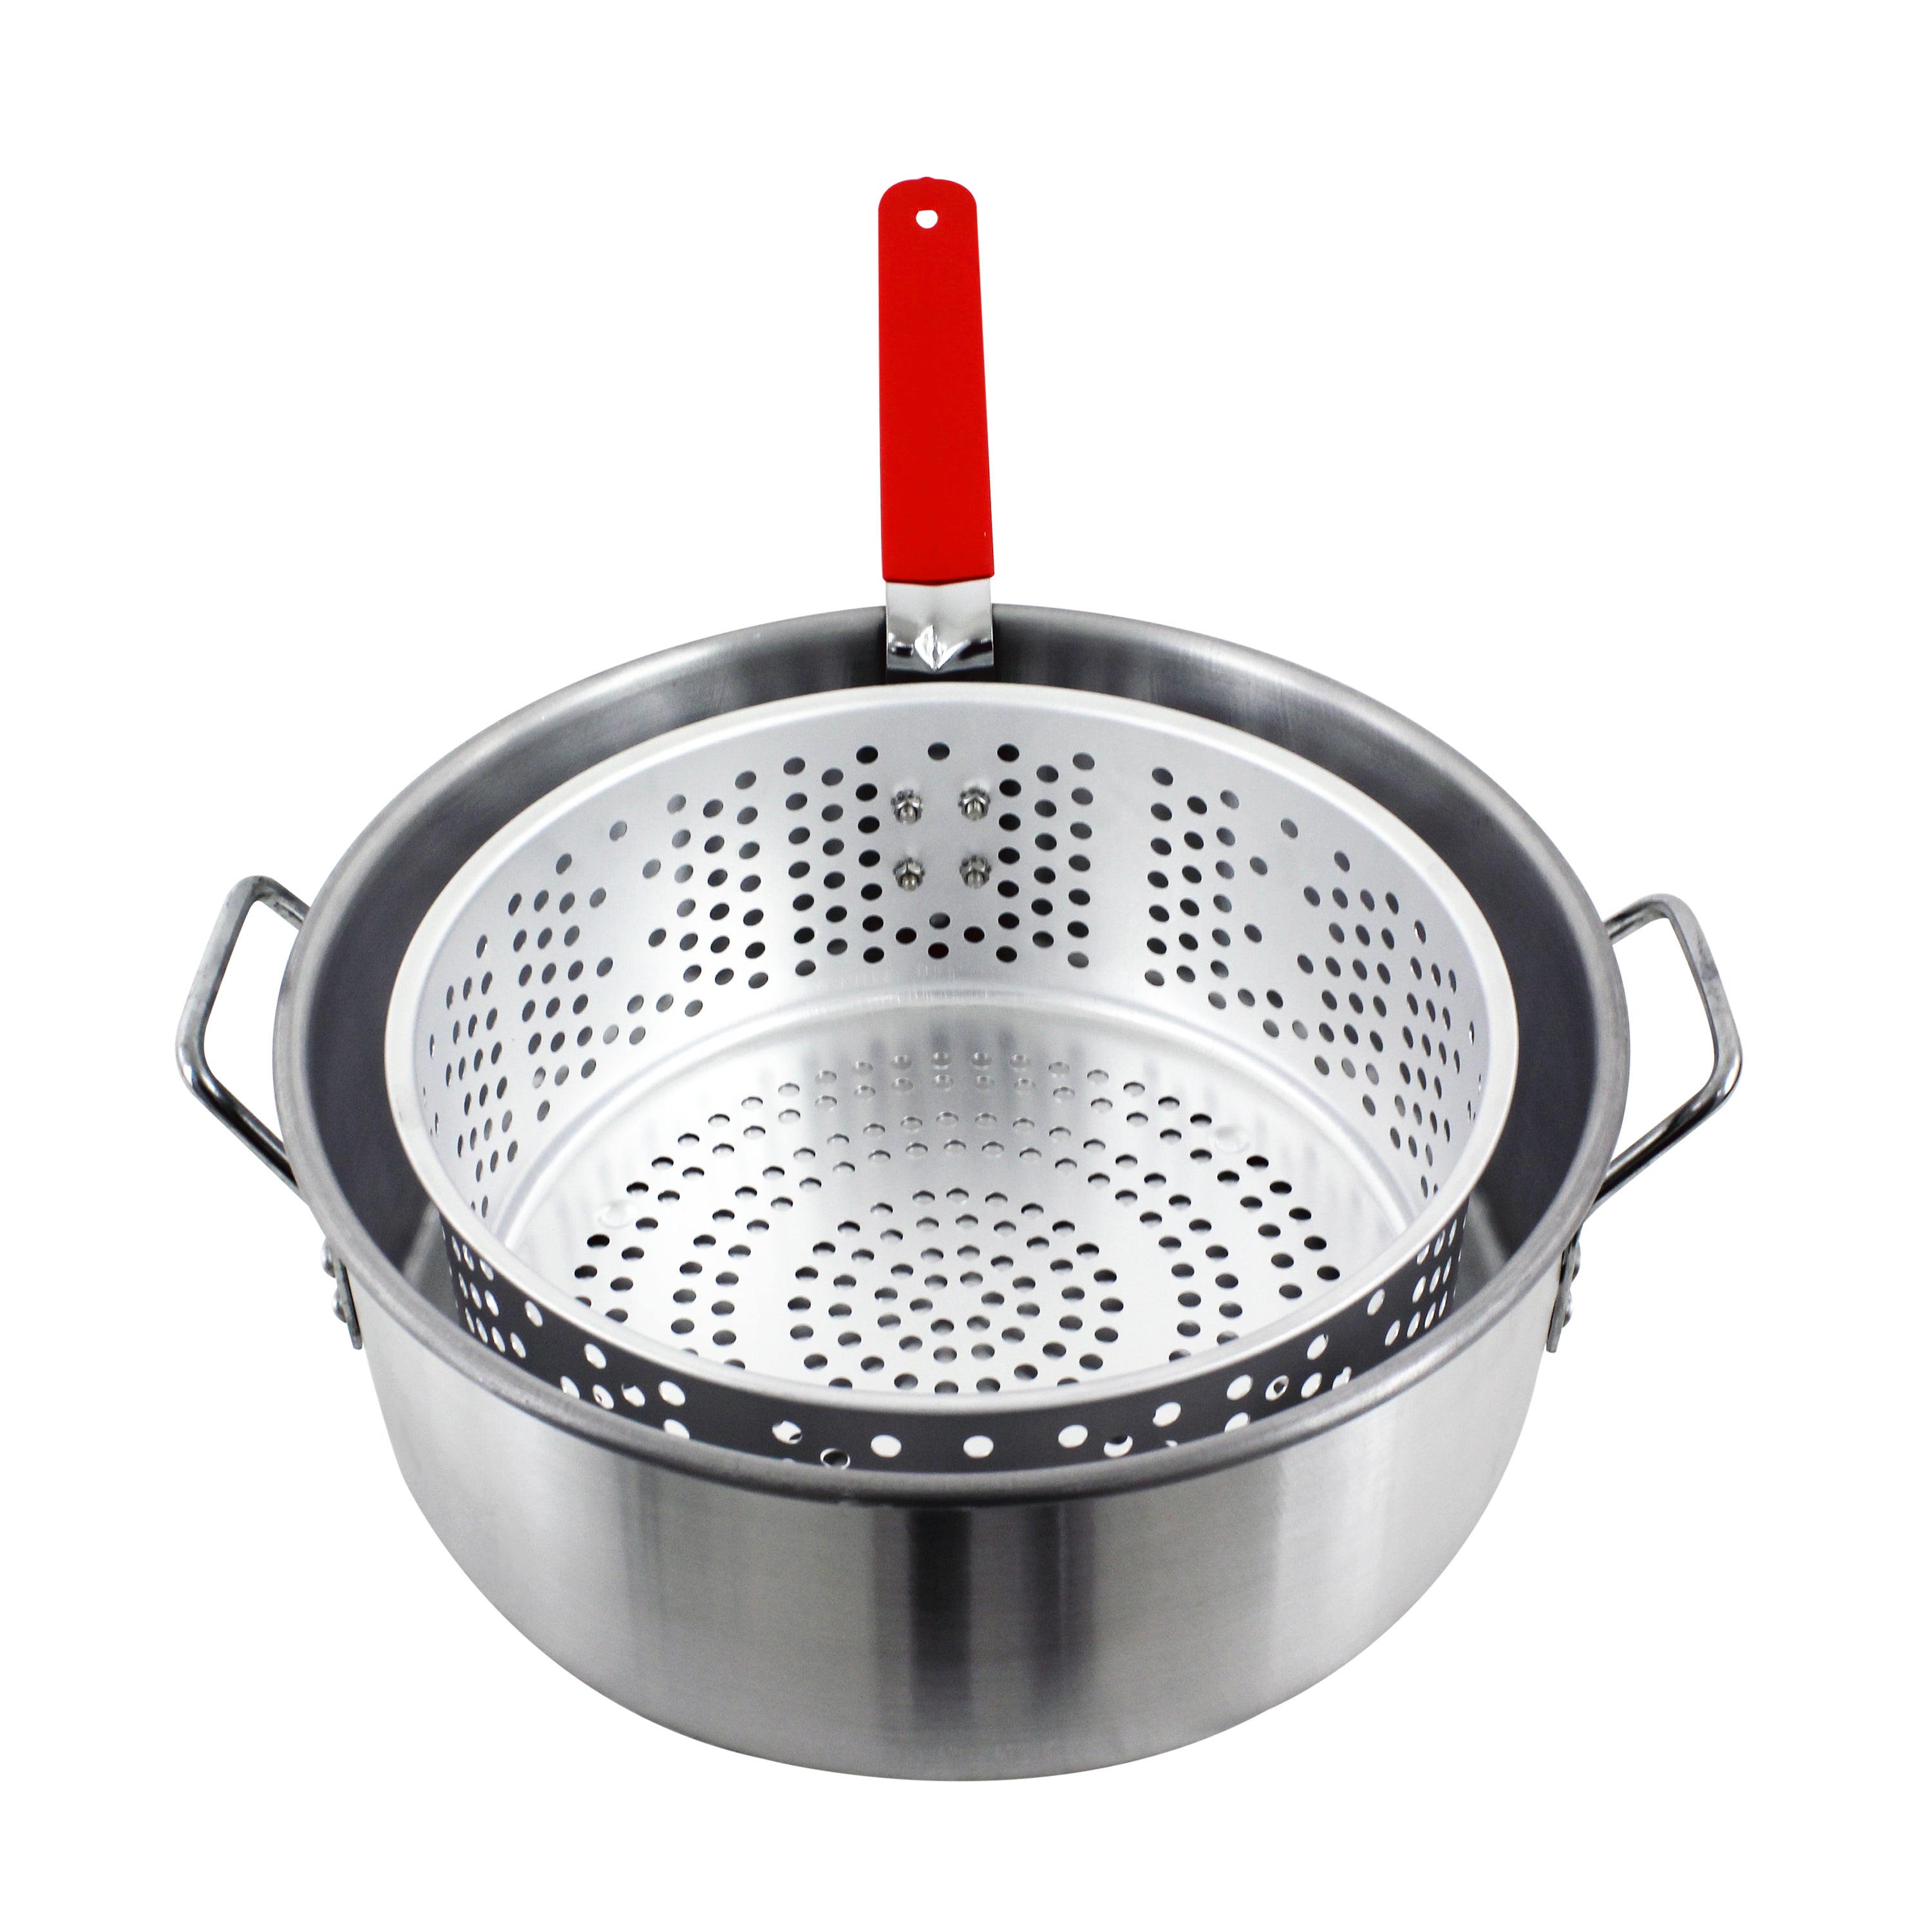 CHARD ASP42 Aluminum Stock Pot and Perforated Strainer Basket Set